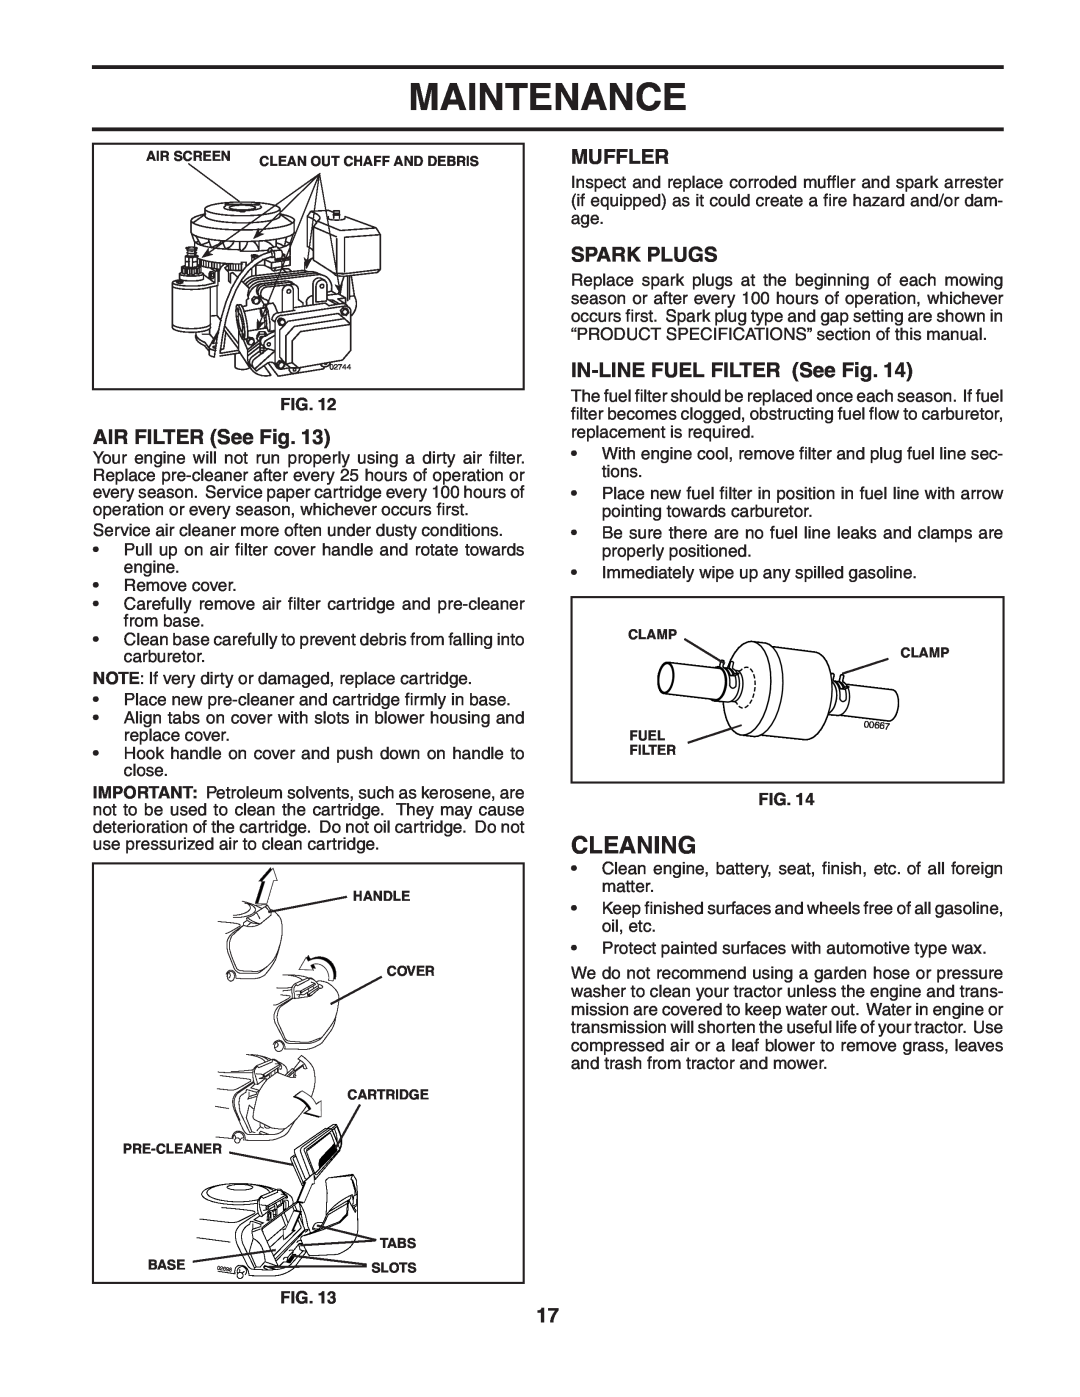 McCulloch MC1136B manual Cleaning, AIR FILTER See Fig, Muffler, Spark Plugs, IN-LINE FUEL FILTER See Fig, Maintenance 